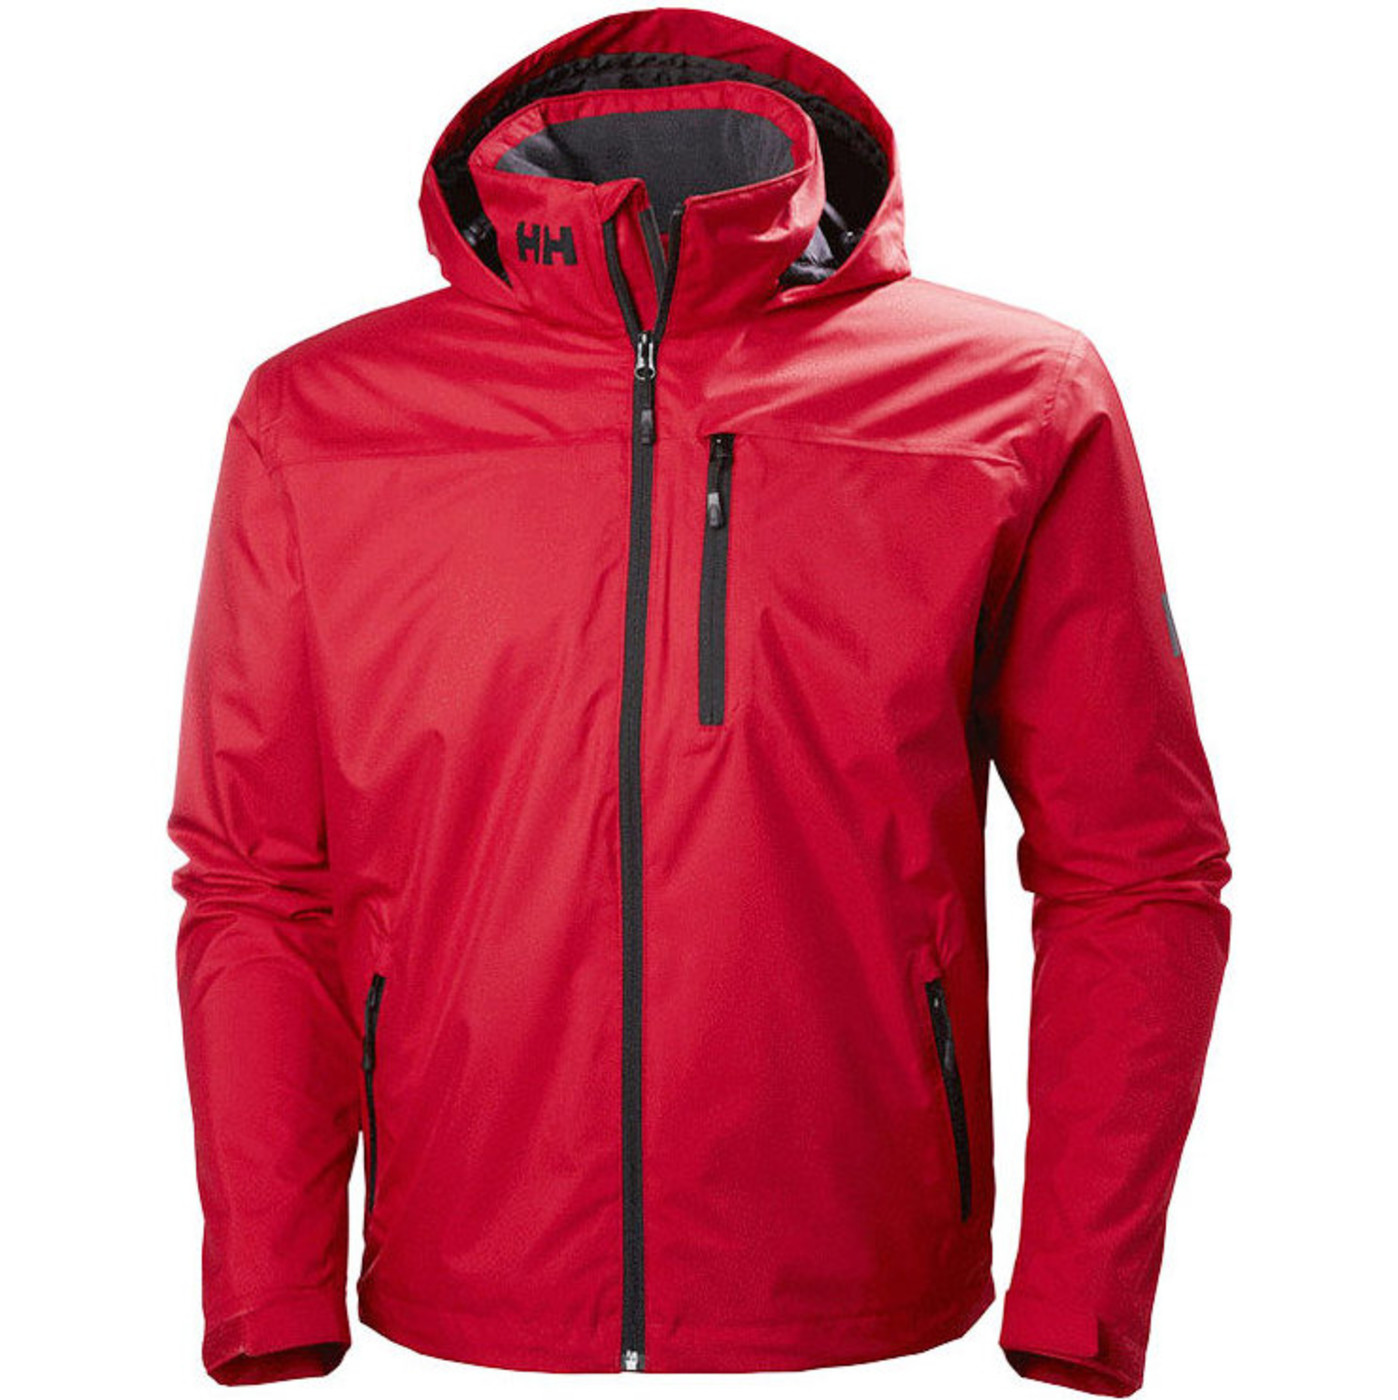 2022 Helly Hansen Hooded Crew Mid Layer Jacket Red 33874 - Sailing ...